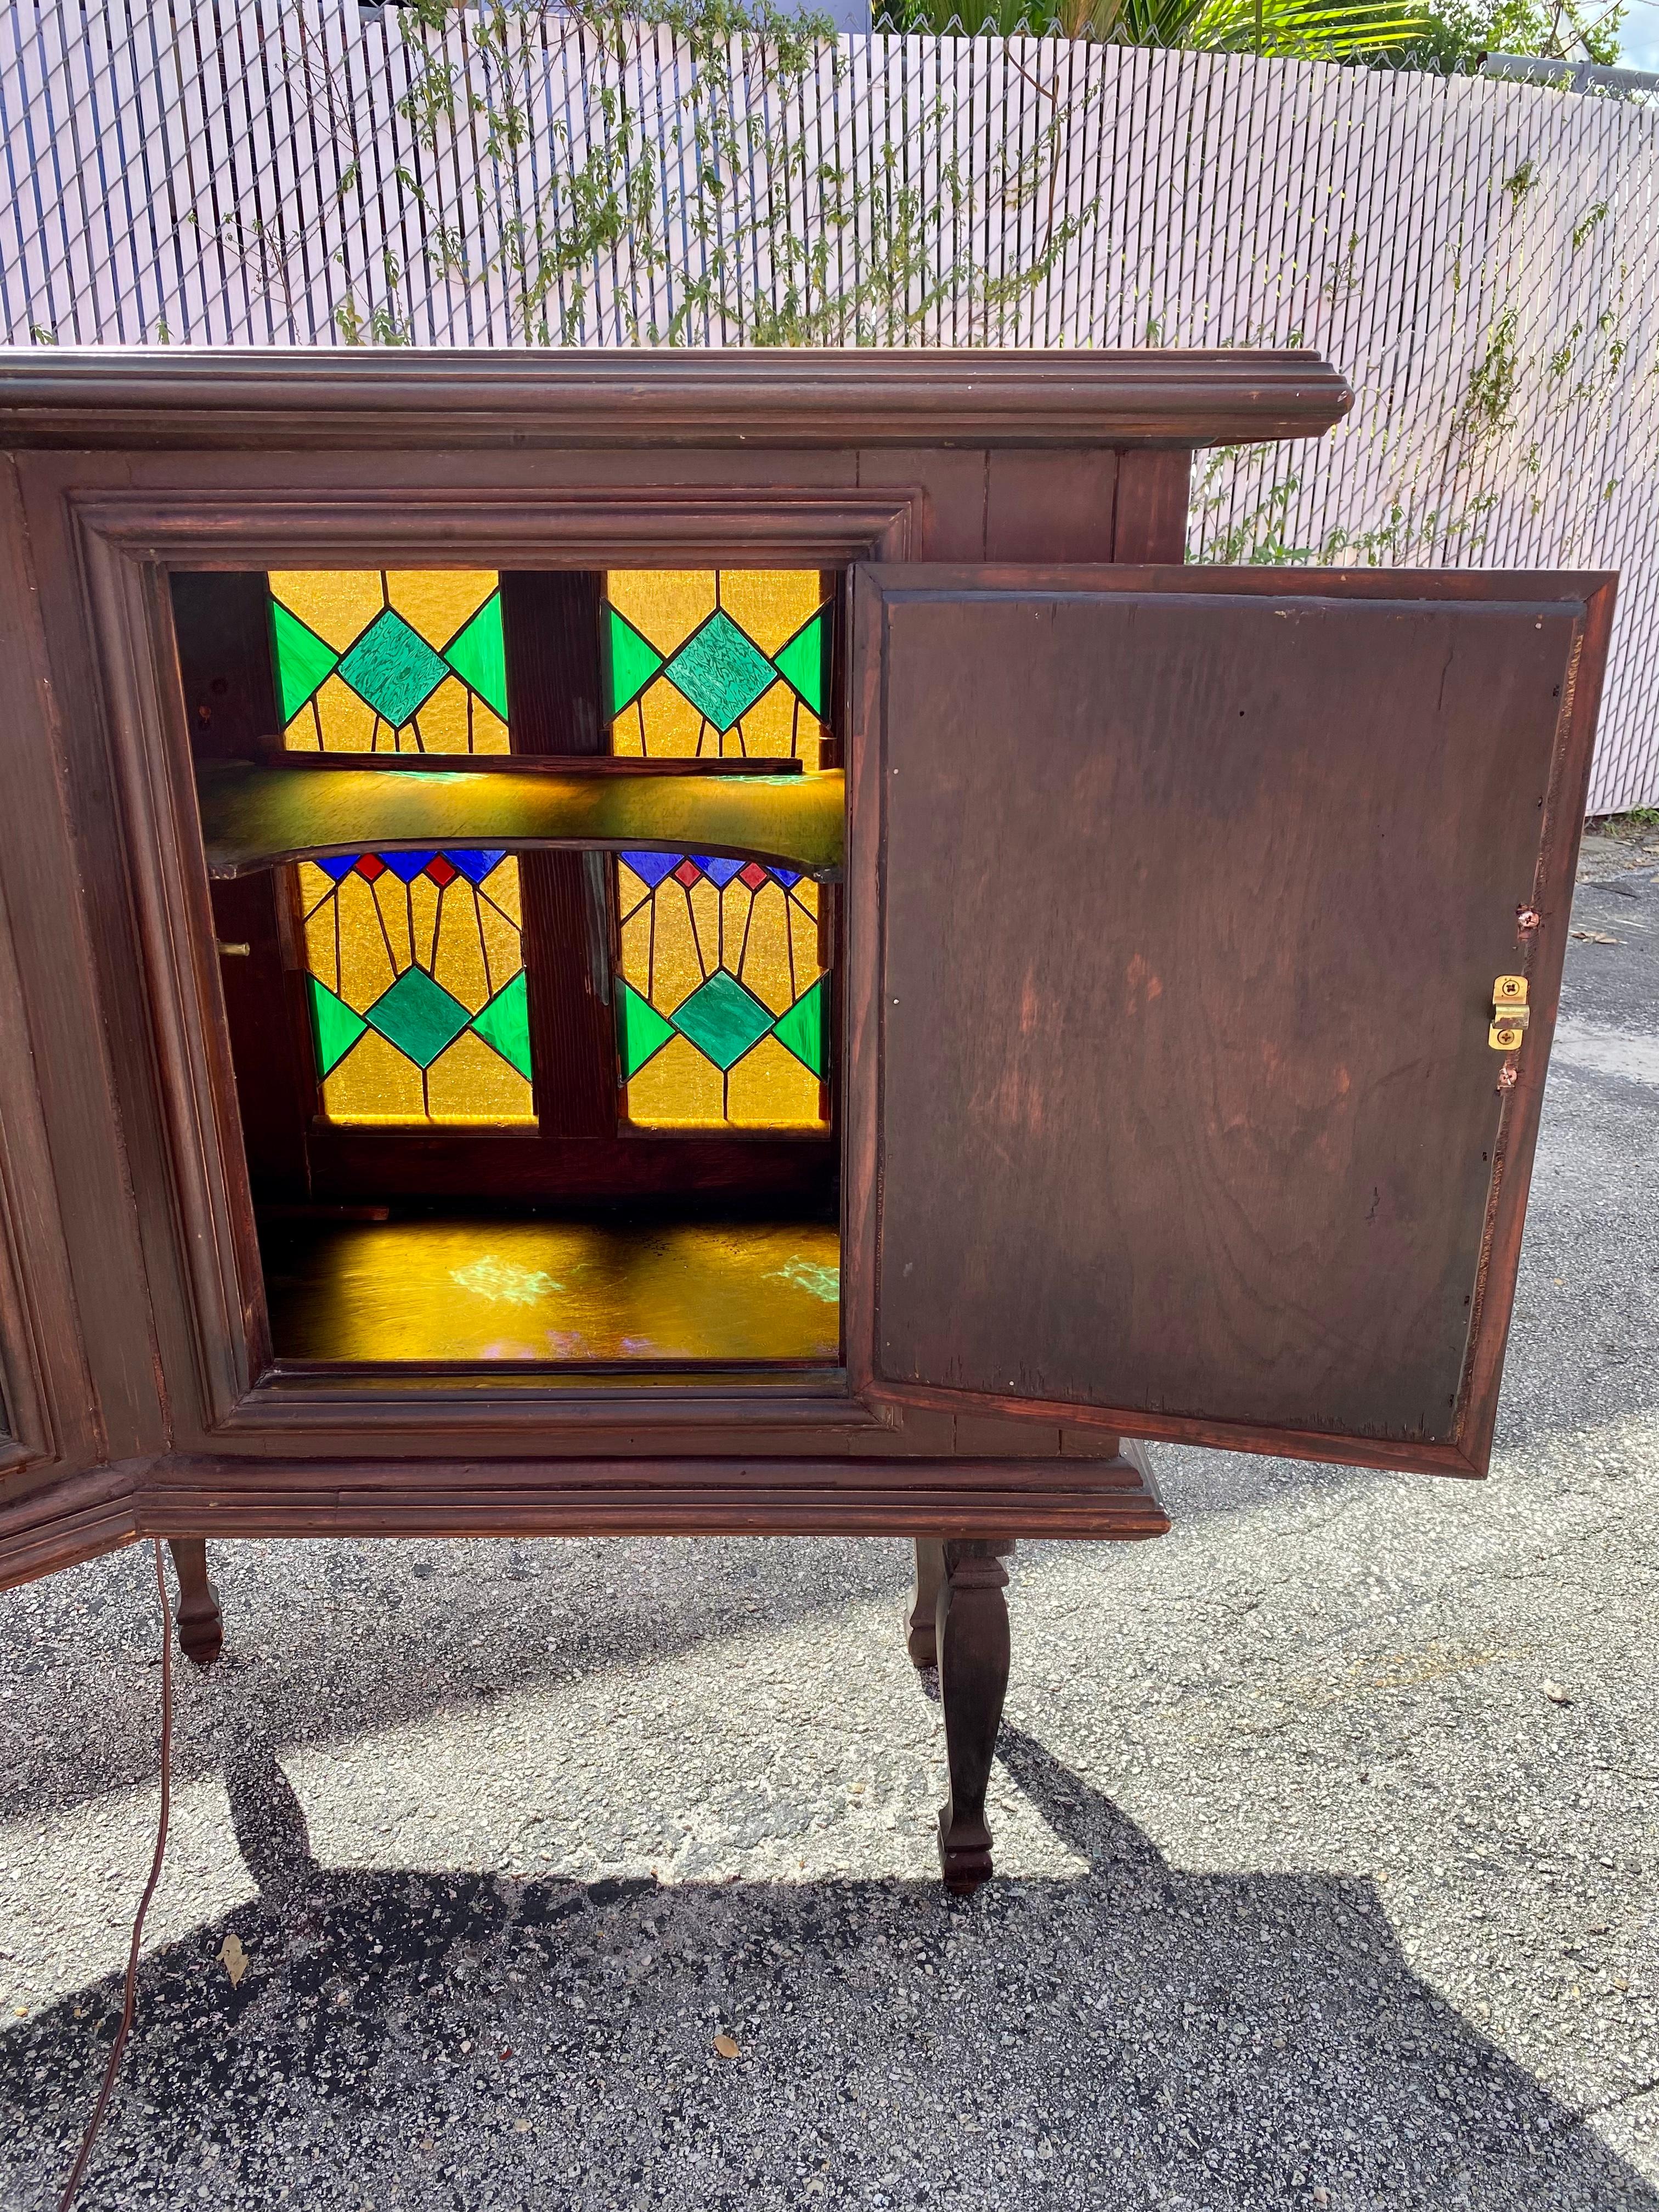 1940s Art Deco Angular Marble Tile Stained Glass Bar Cabinet Console For Sale 6